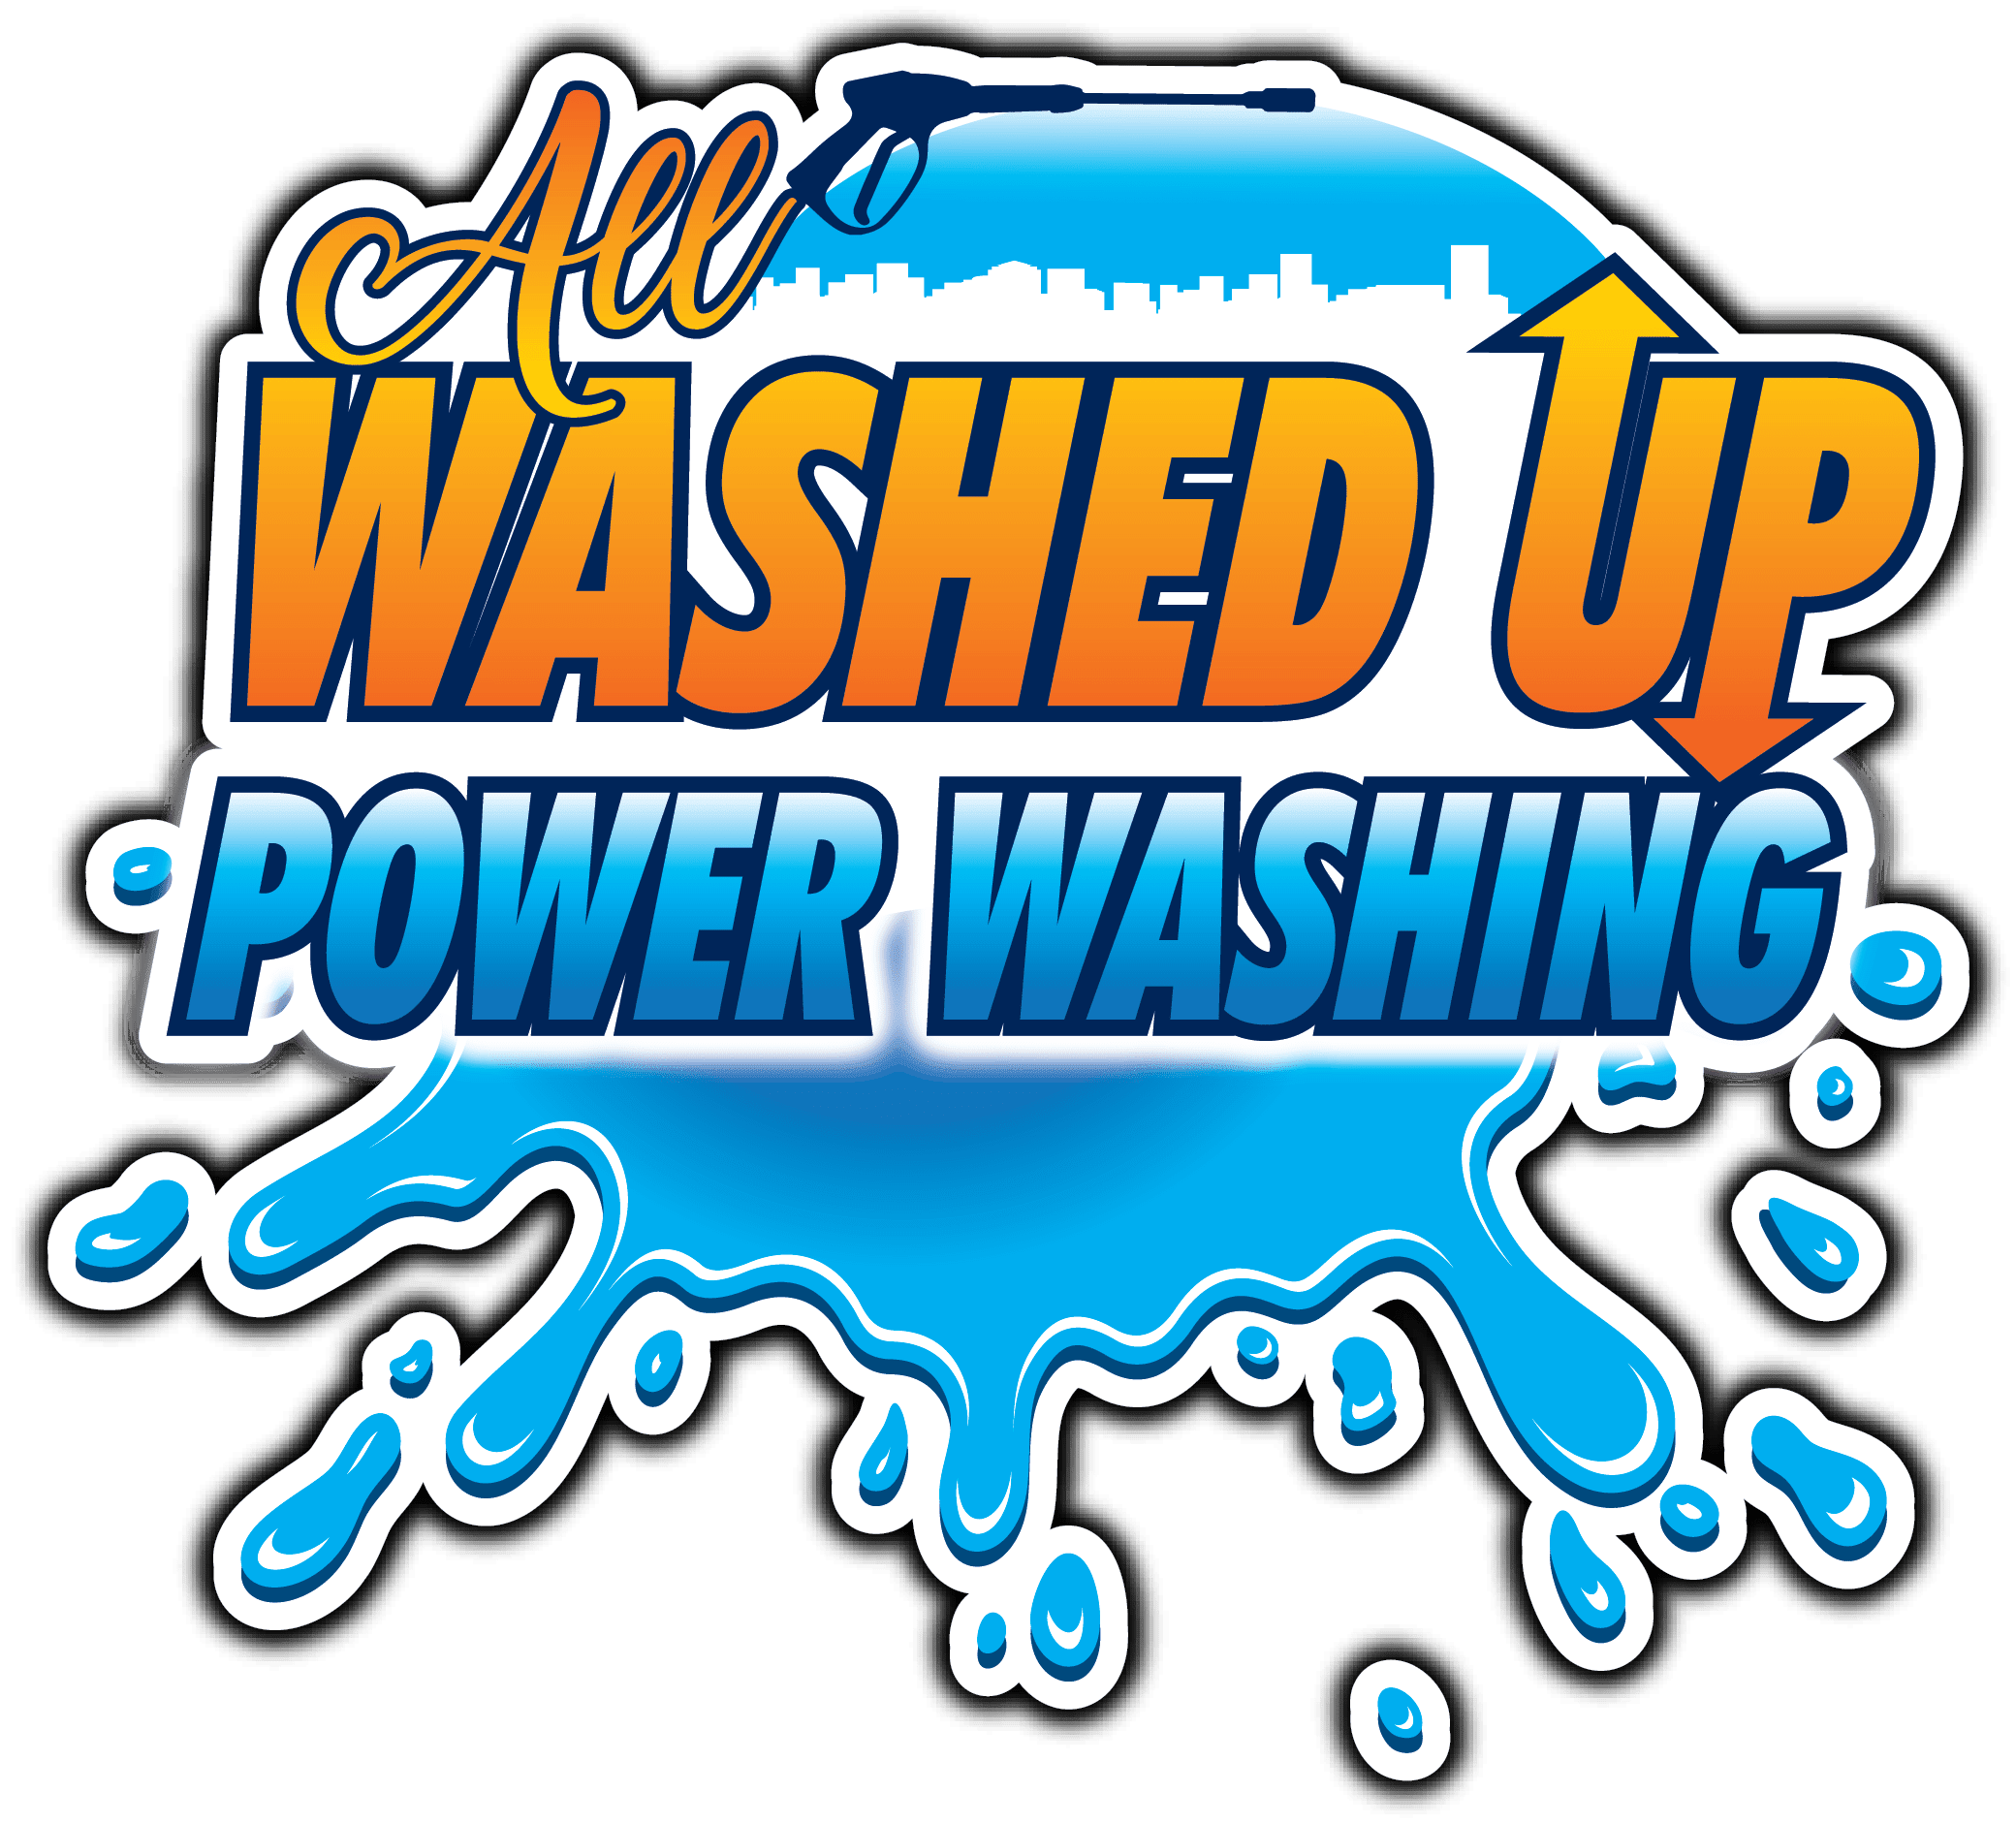 All Washed Up Power Washing